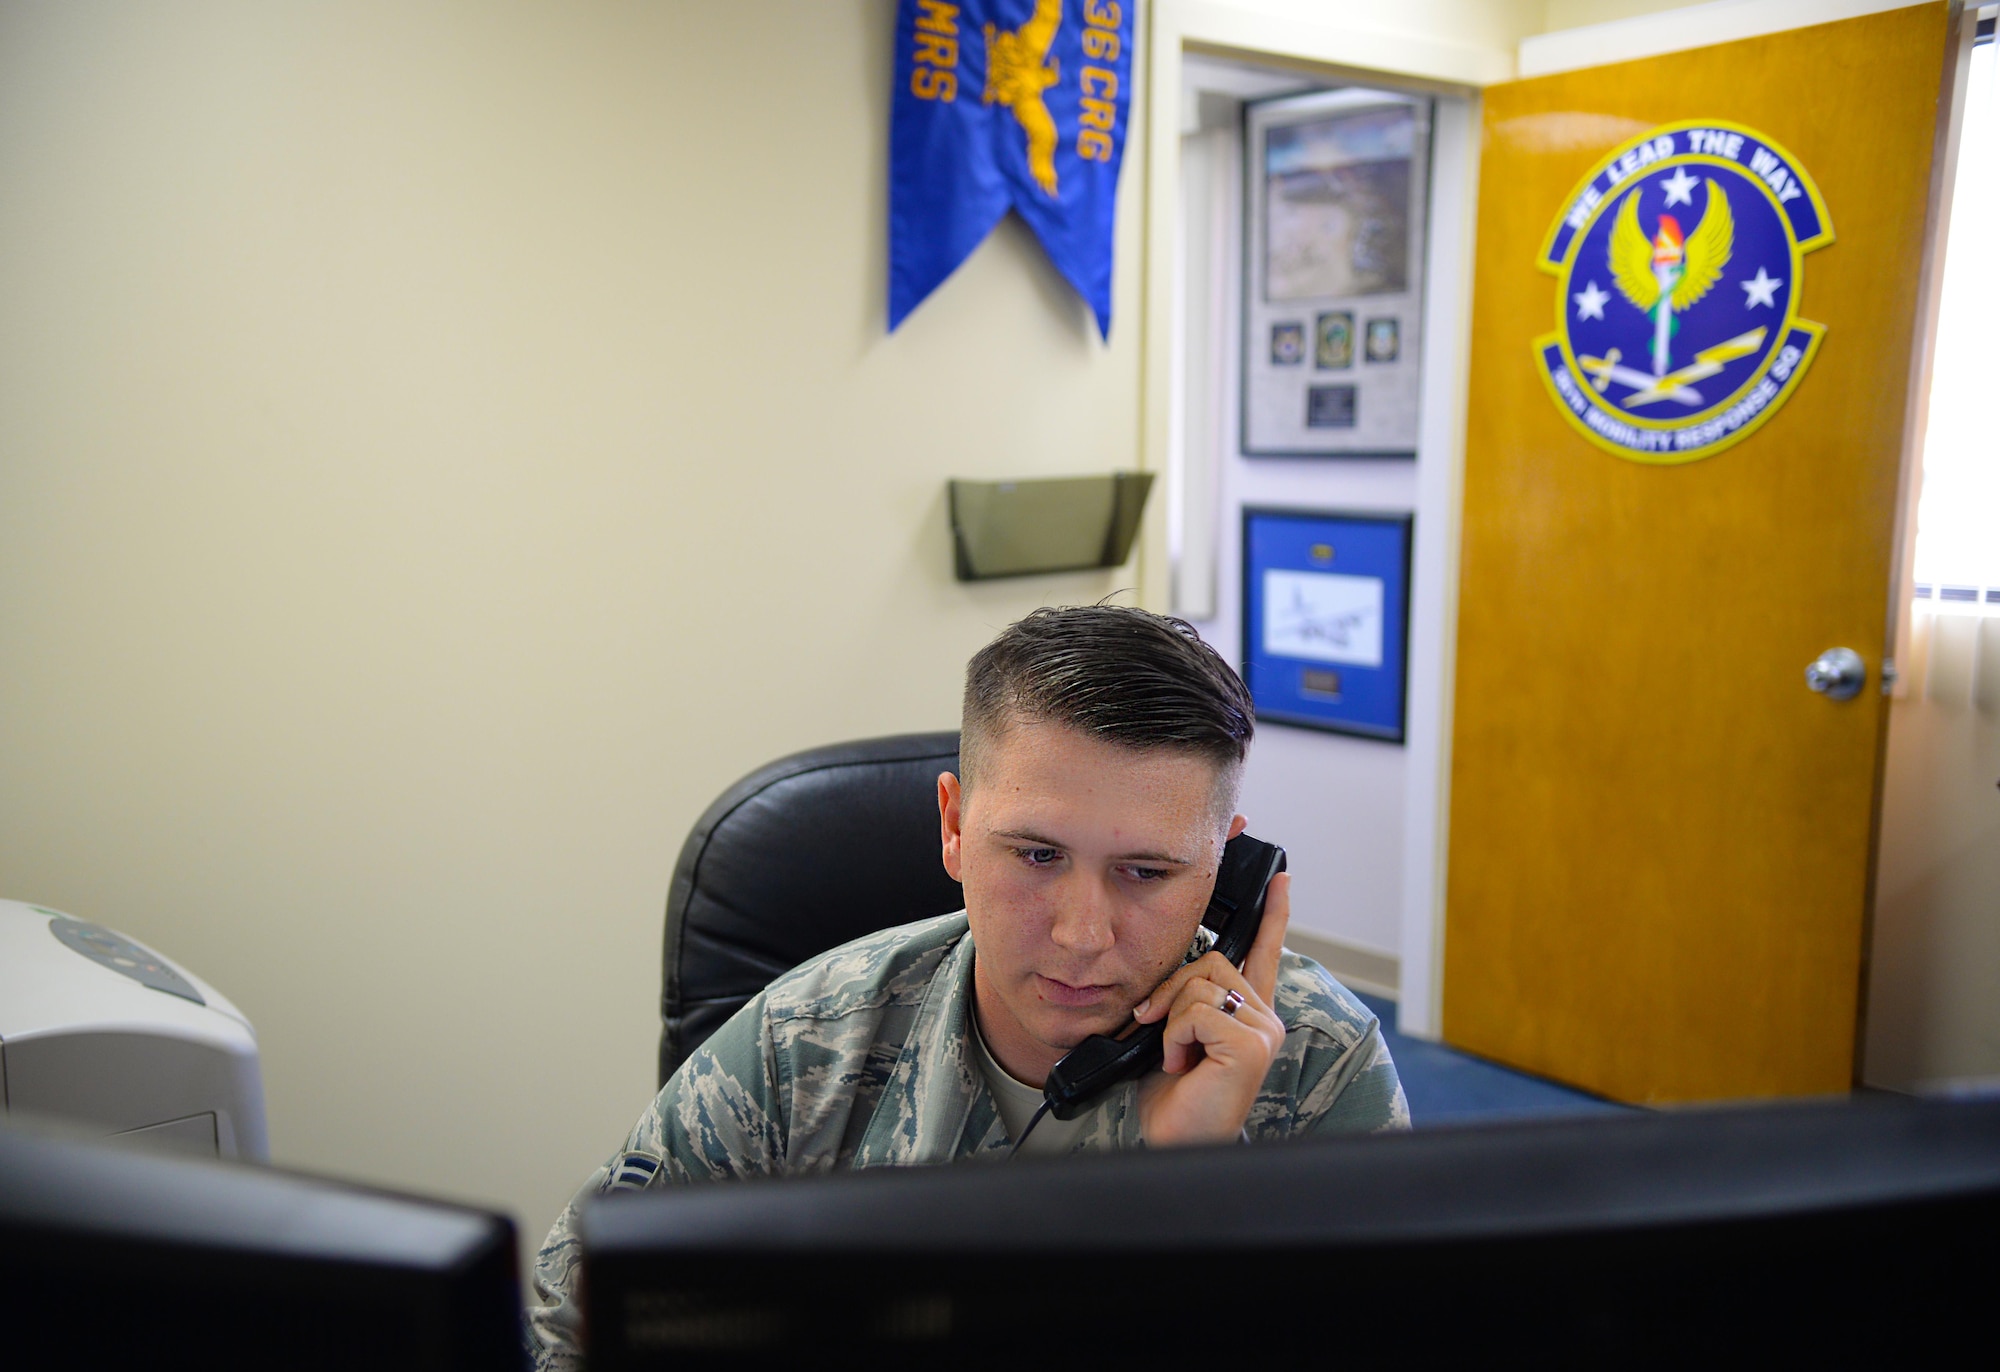 Senior Airman Presley Griffith, a command support staff executive assistant, works at his office in the 36th Mobility Response Squadron June 6, 2015, Andersen Air Force Base, Guam. Griffith created a free spring practice camp to offer local high school athletes an additional mentoring and practice opportunity before football season begins. (U.S. Air Force photo/Senior Airman Alexander W. Riedel)